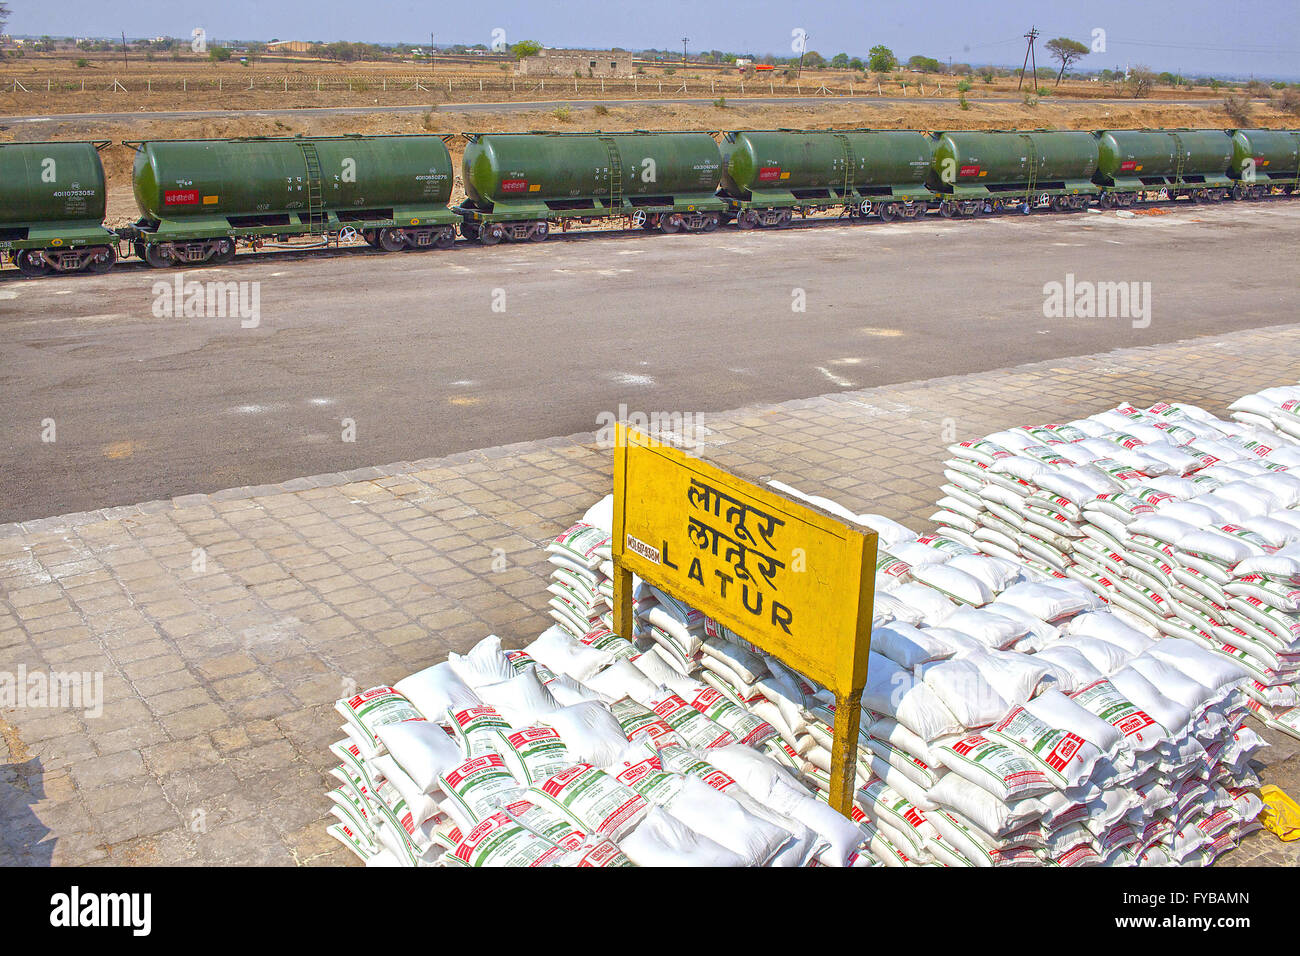 Latur, Maharashtra. 20th Apr, 2016. 20 April 2016 - Latur - INDIA.After completing the 350 kms journey from Miraj, The 50 Wagon Water train arrives at Latur with much needed drinking water. © Subhash Sharma/ZUMA Wire/Alamy Live News Stock Photo